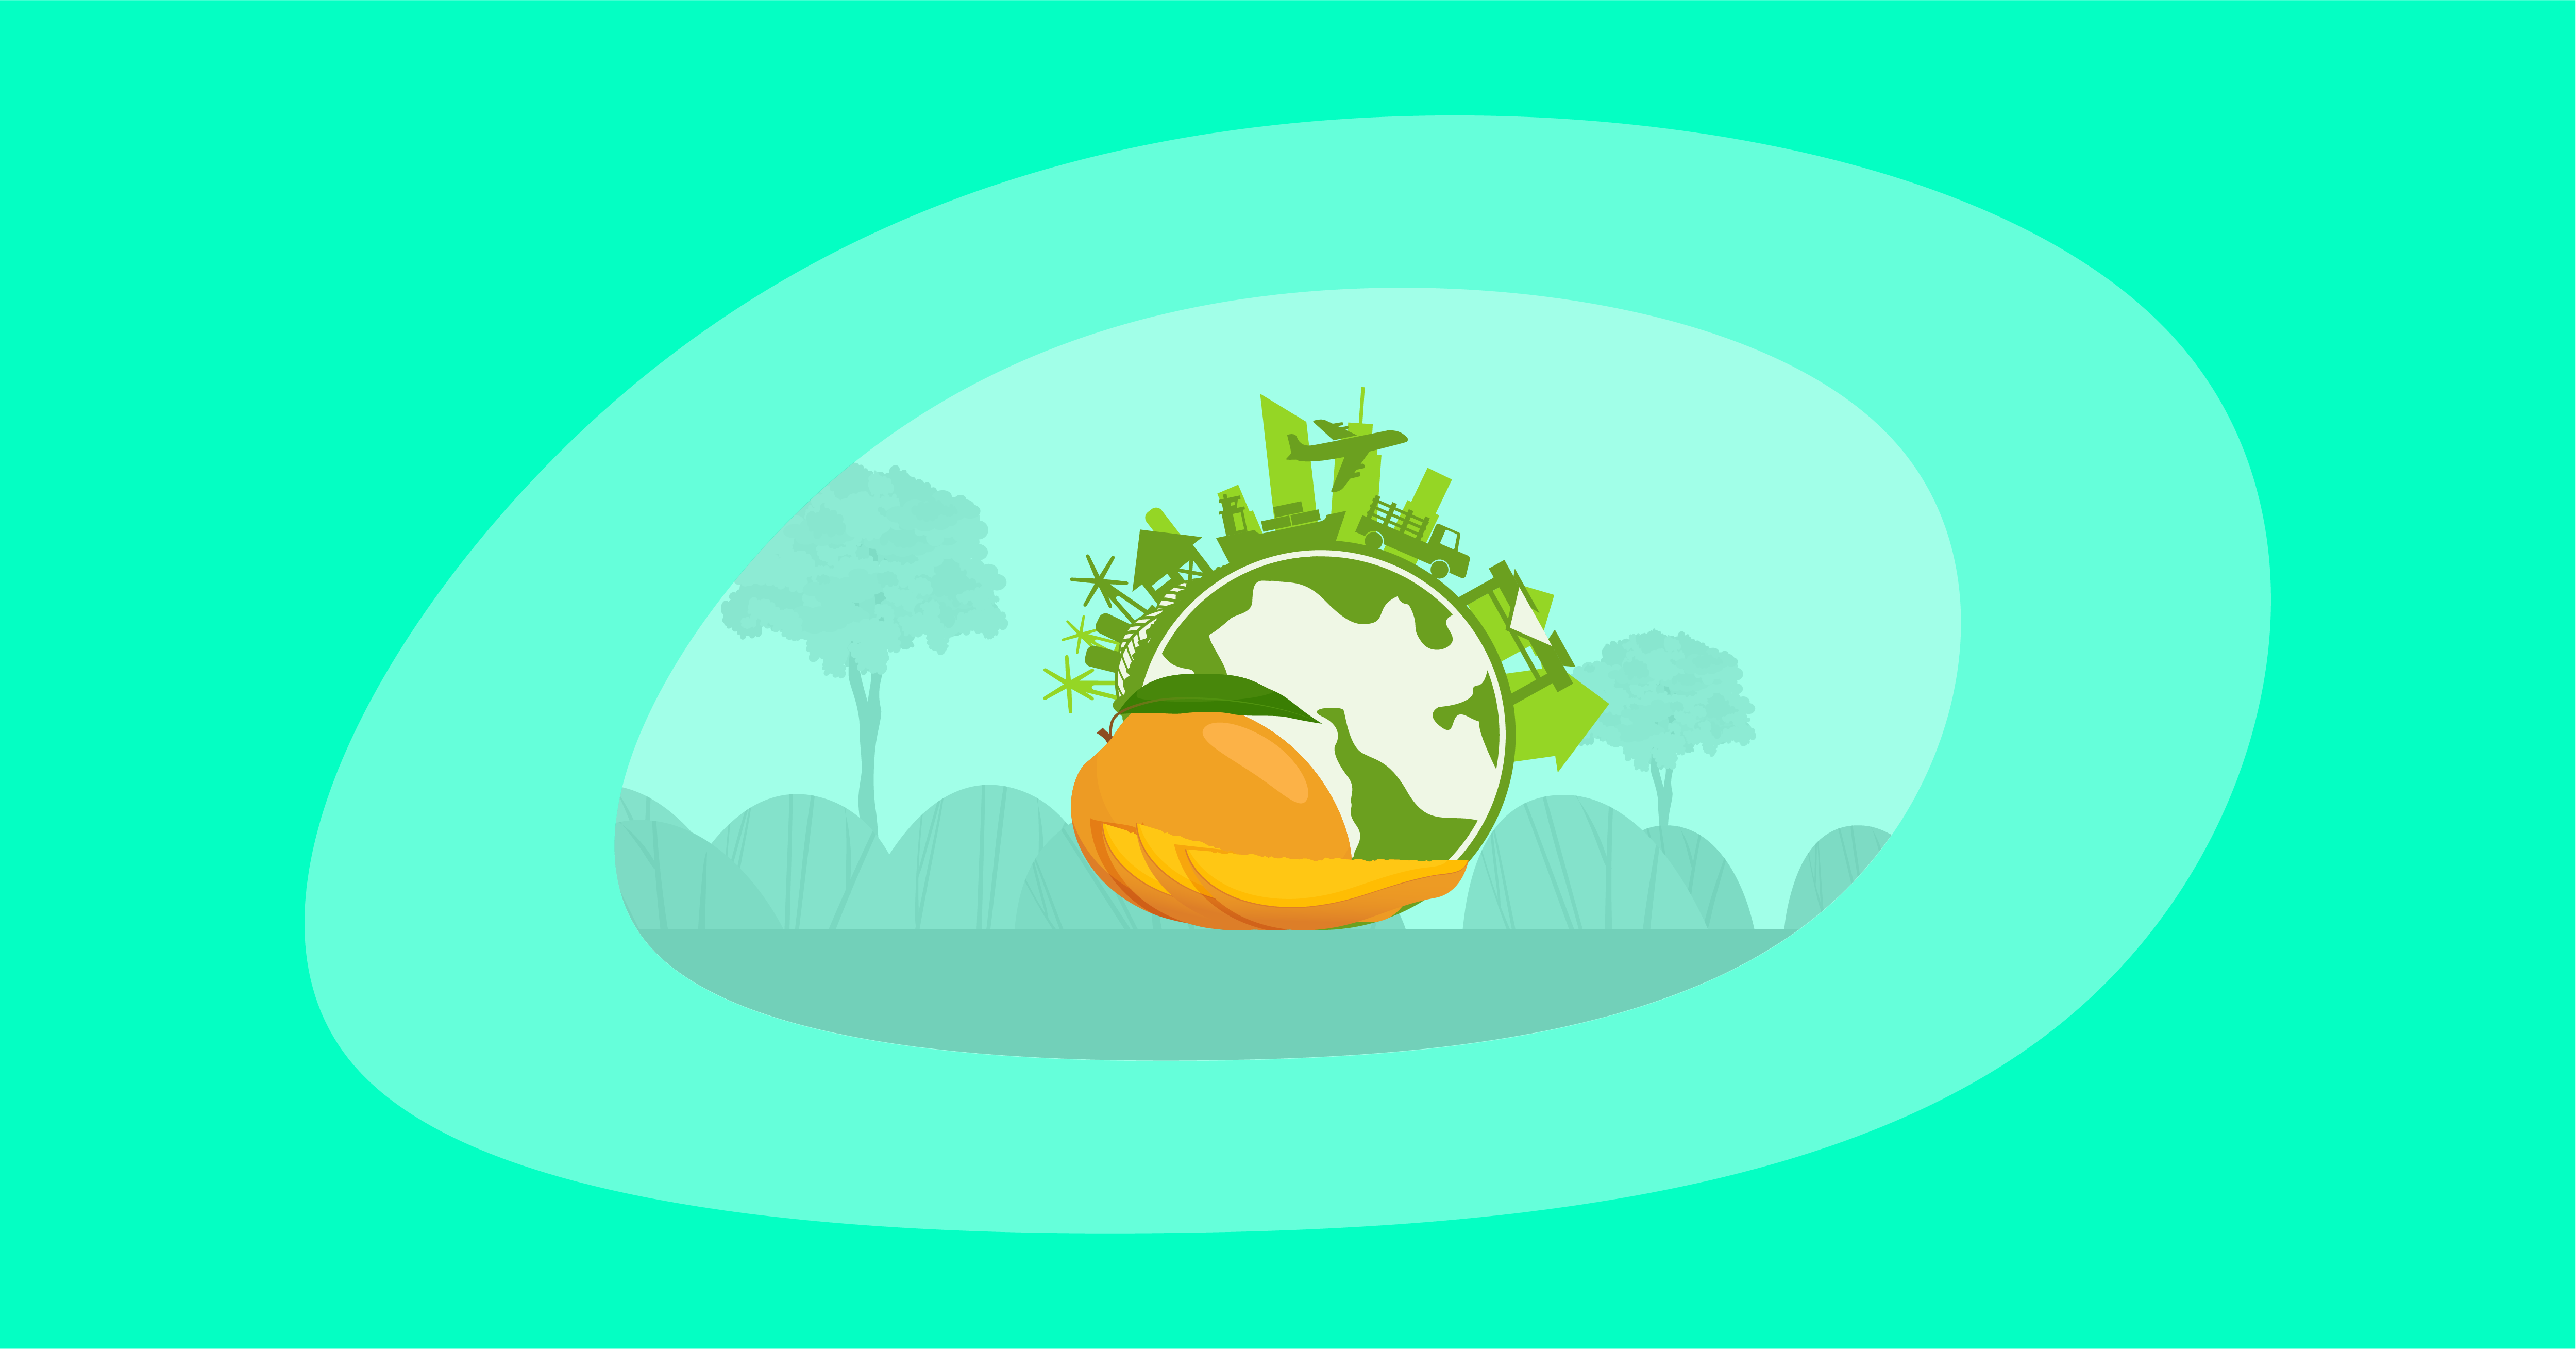 Attempted illustration of mangoes and their environmental impact